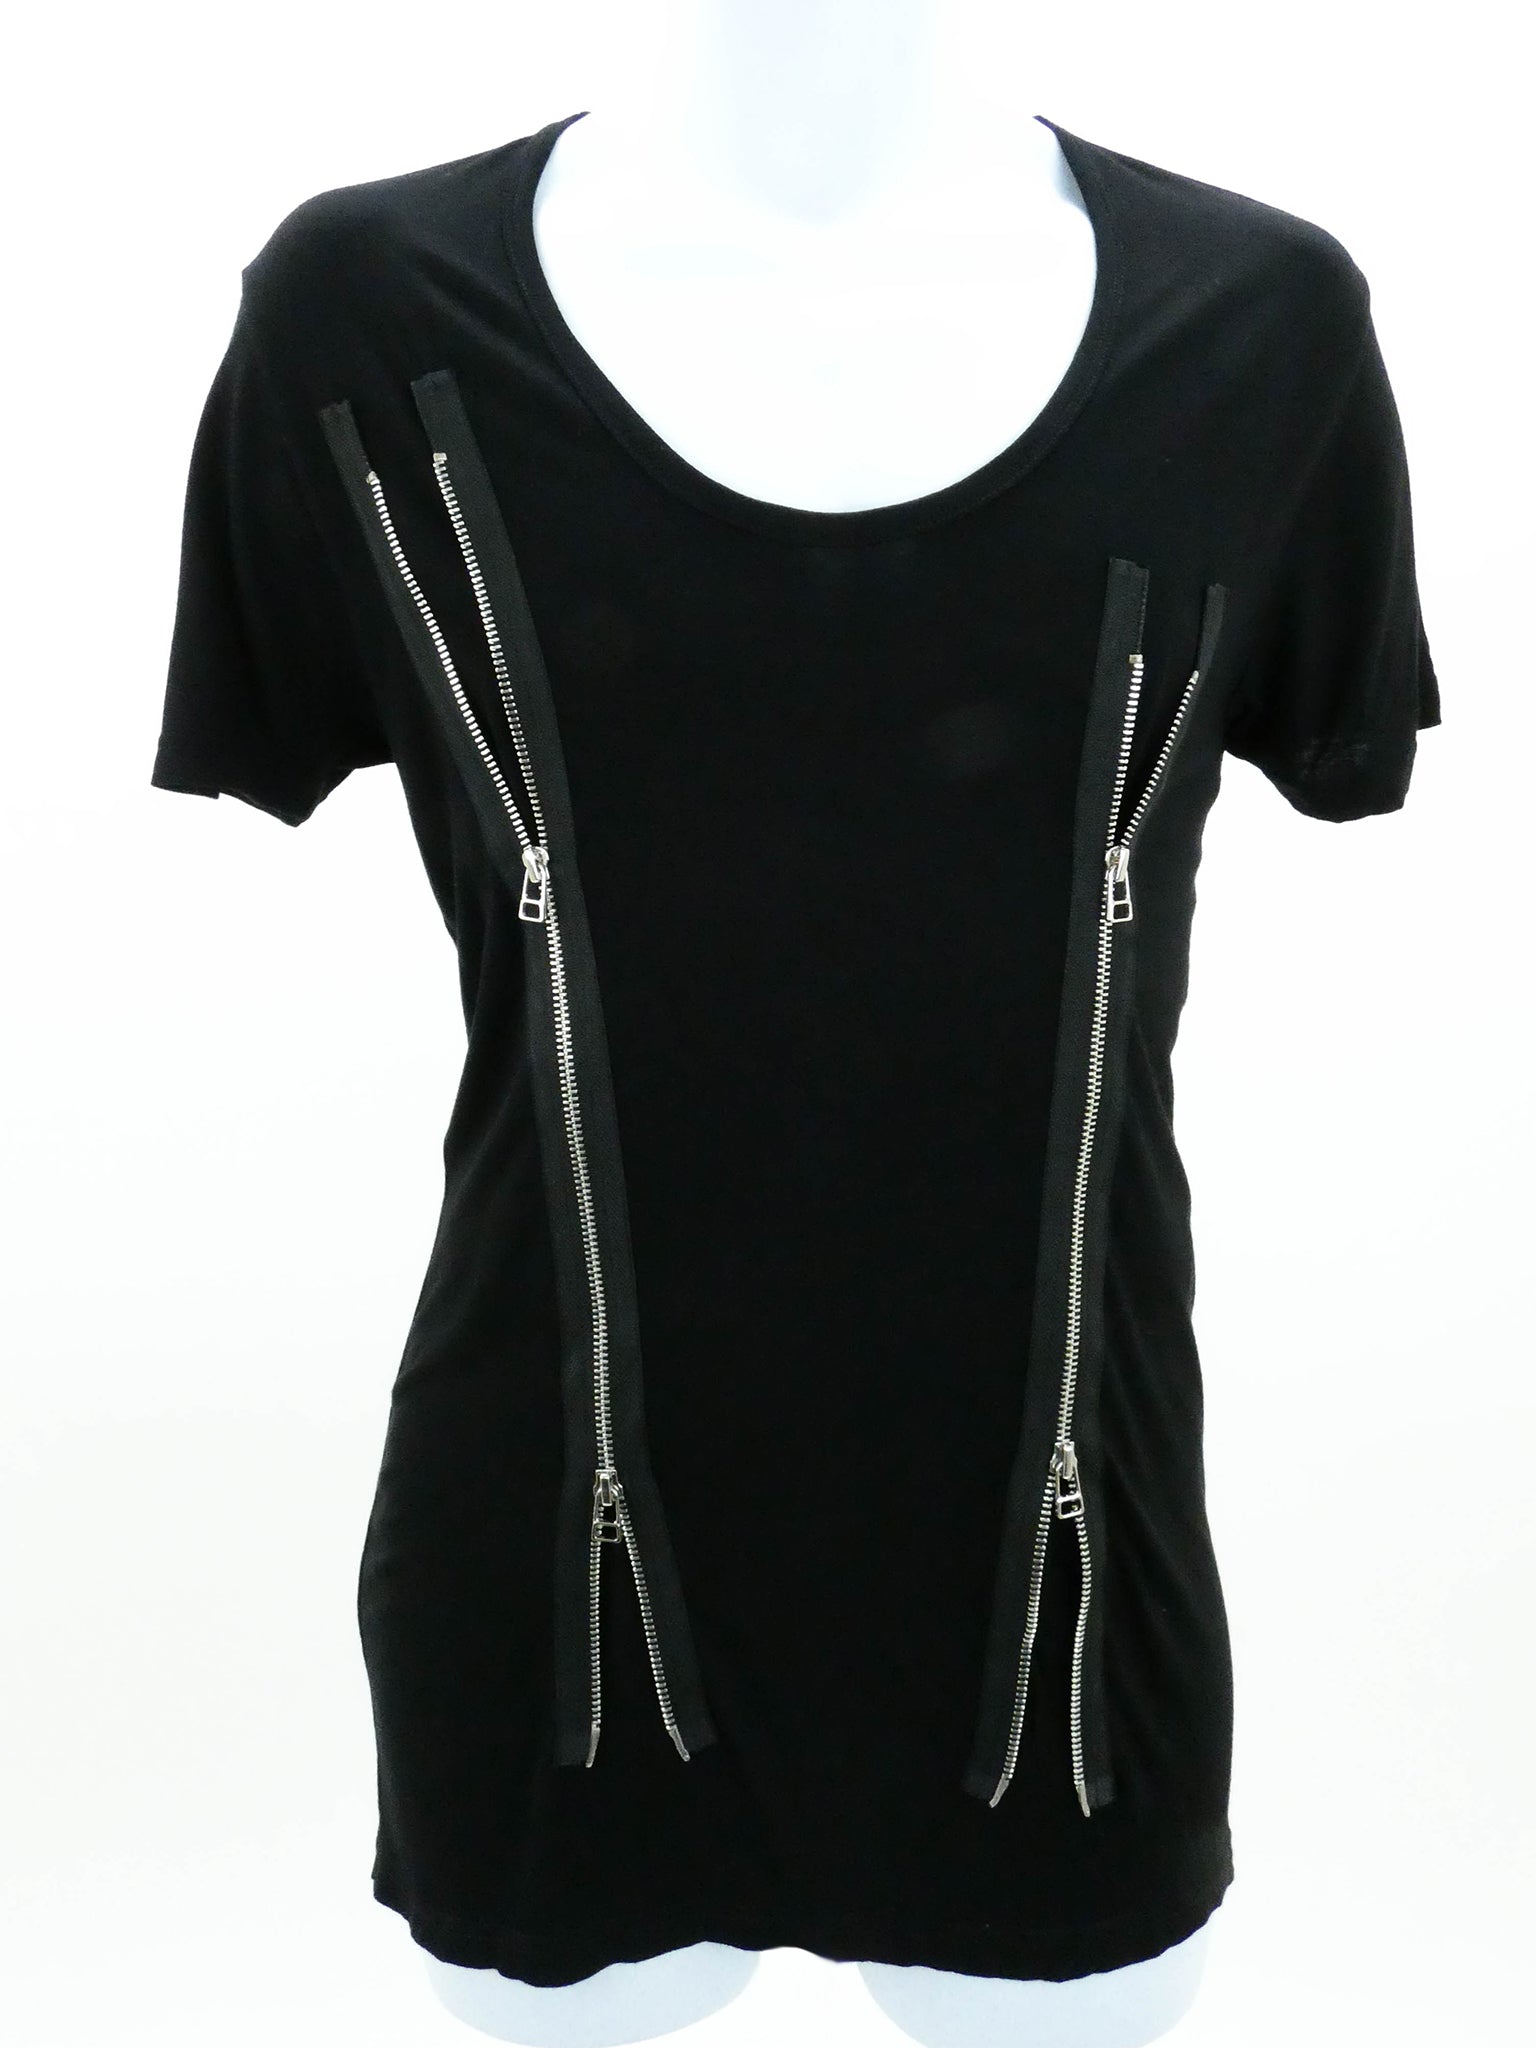 BLACK DOUBLE ZIP T-SHIRT IN RAYON